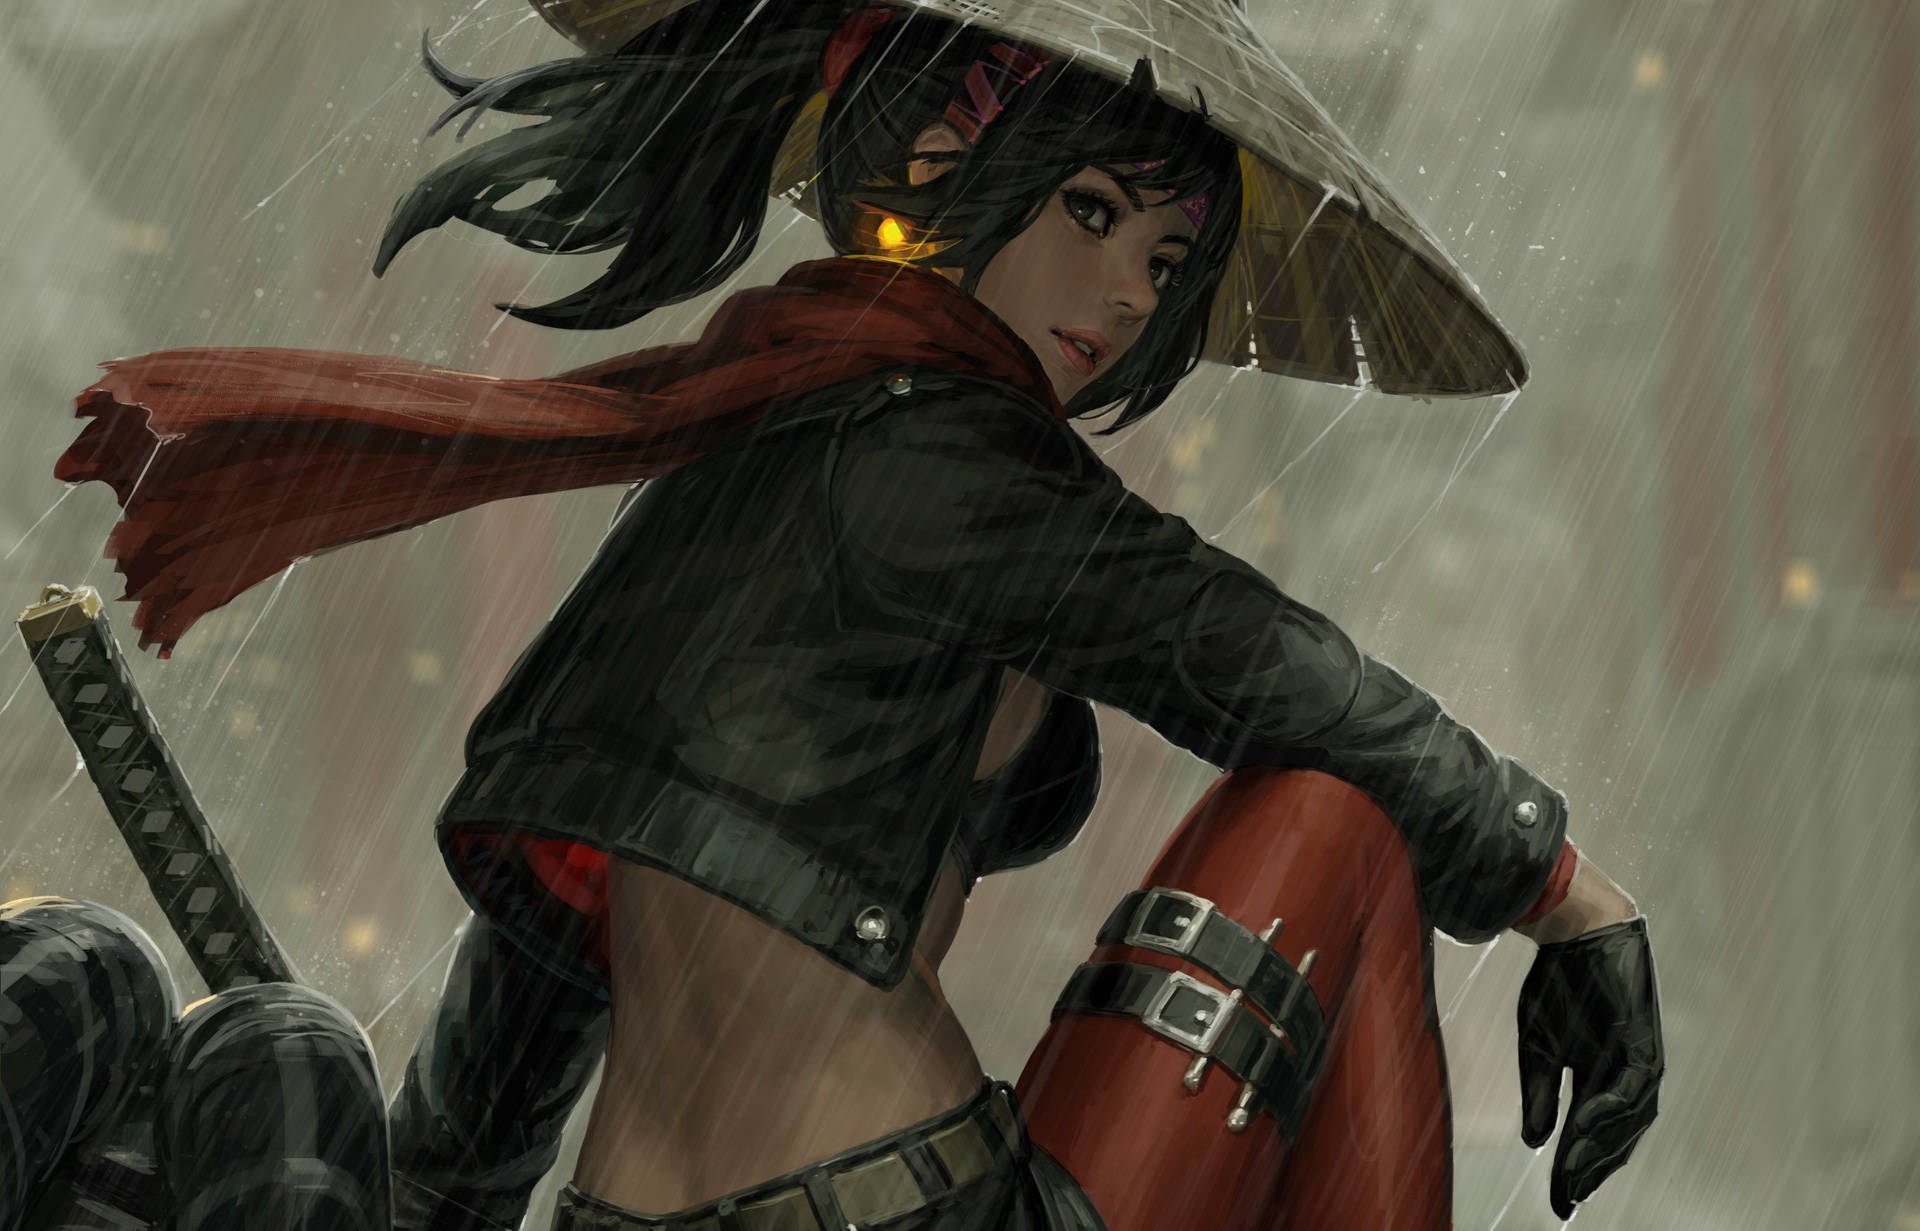 A Young Female Samurai, Trained In Traditional Japanese Martial Arts, Stands Ready To Fight. Background